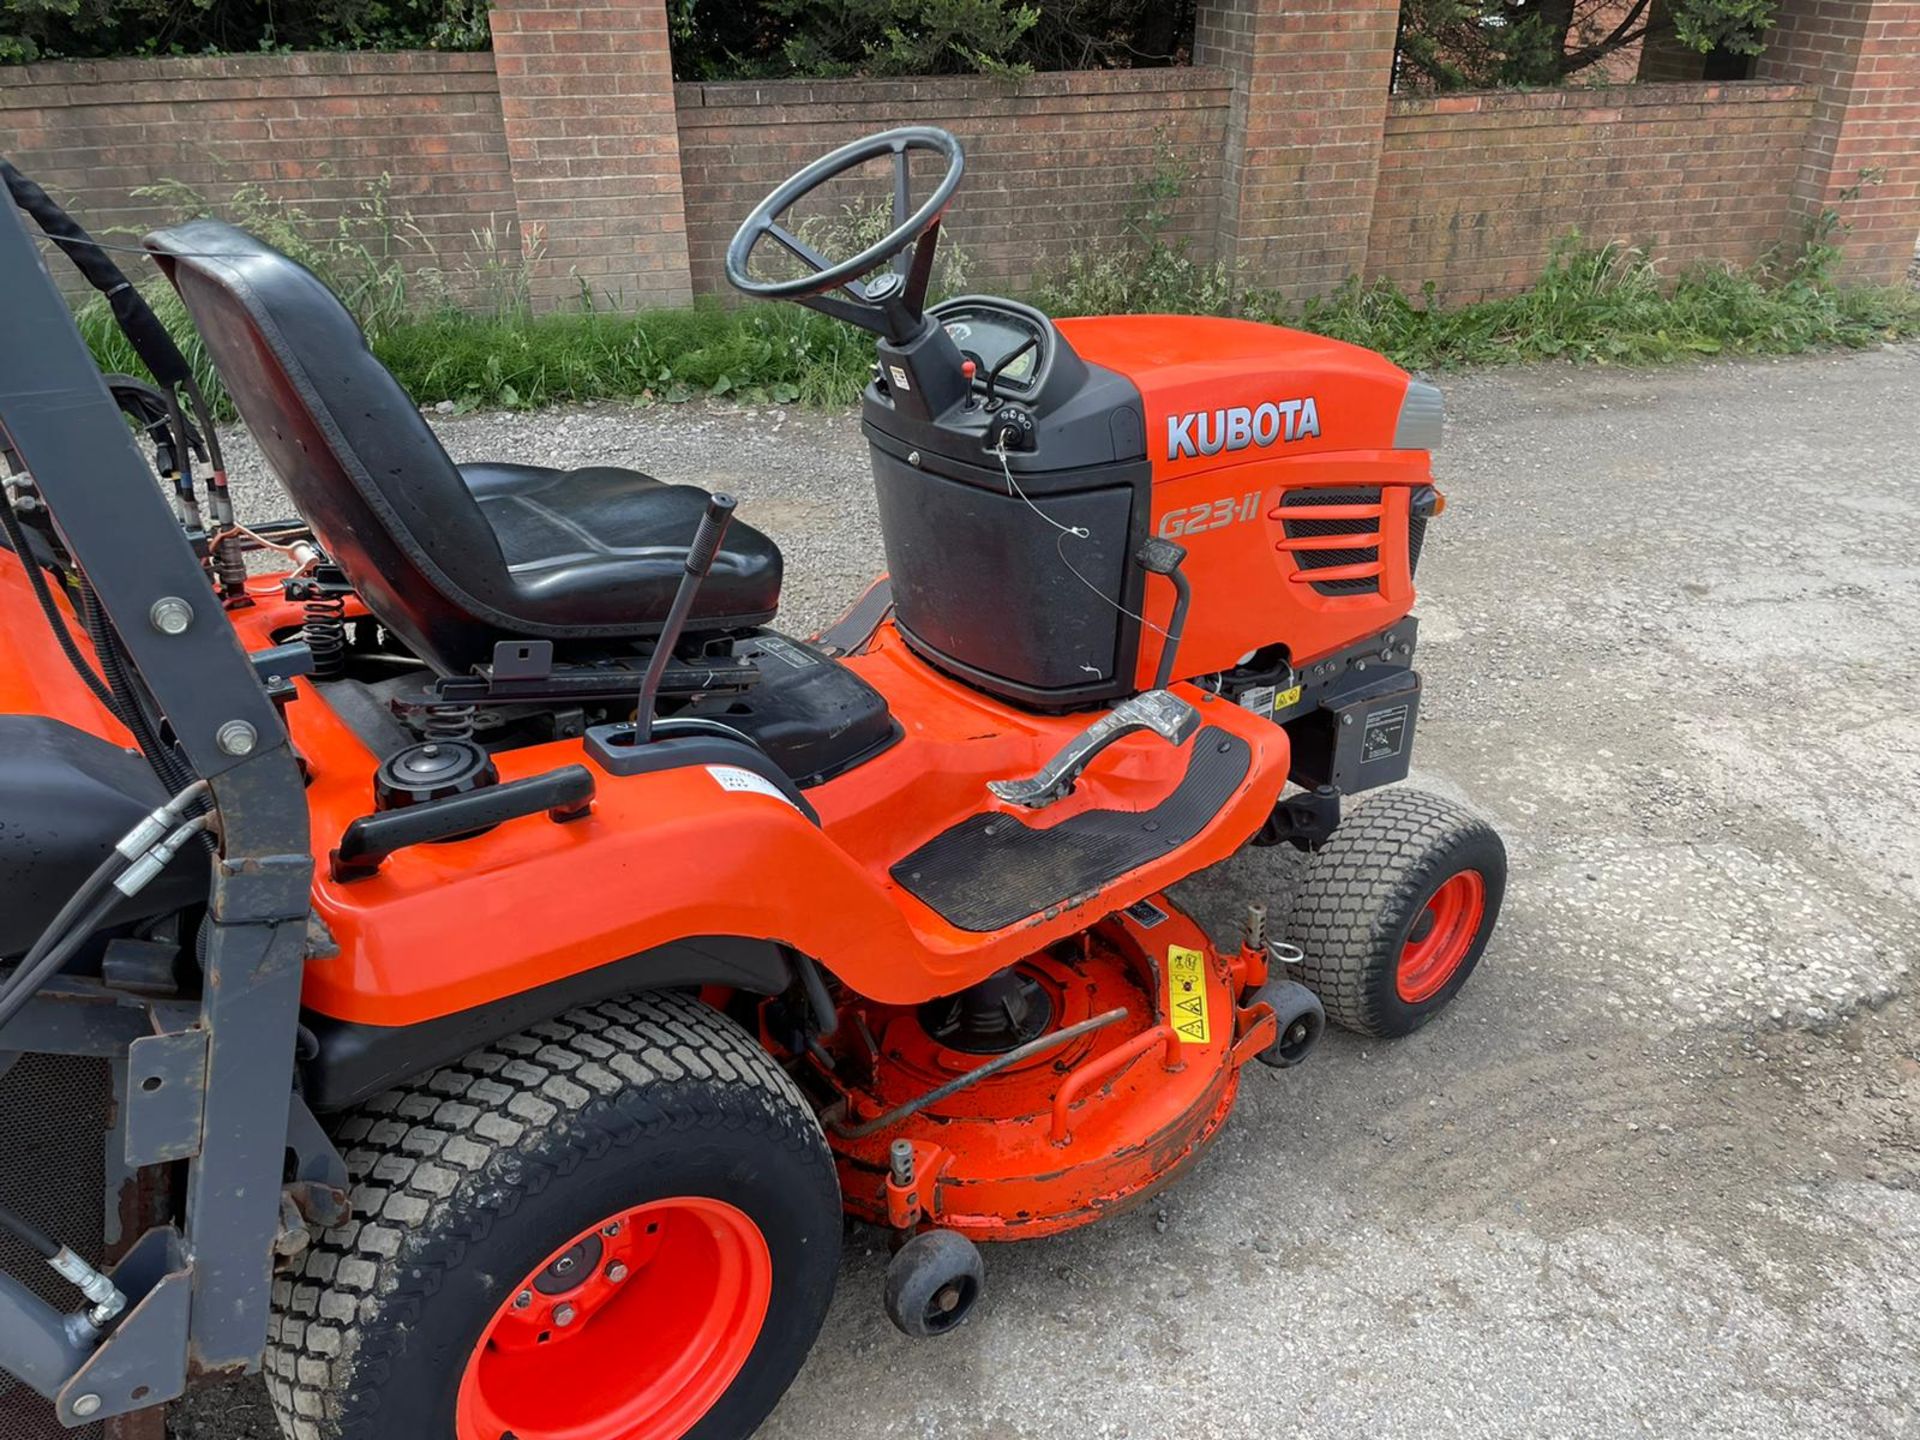 2013 KUBOTA G23-II RIDE ON HIGH TIP MOWER, RUNS AND DRIVES, SHOWING A LOW 771 HOURS *PLUS VAT* - Image 4 of 11